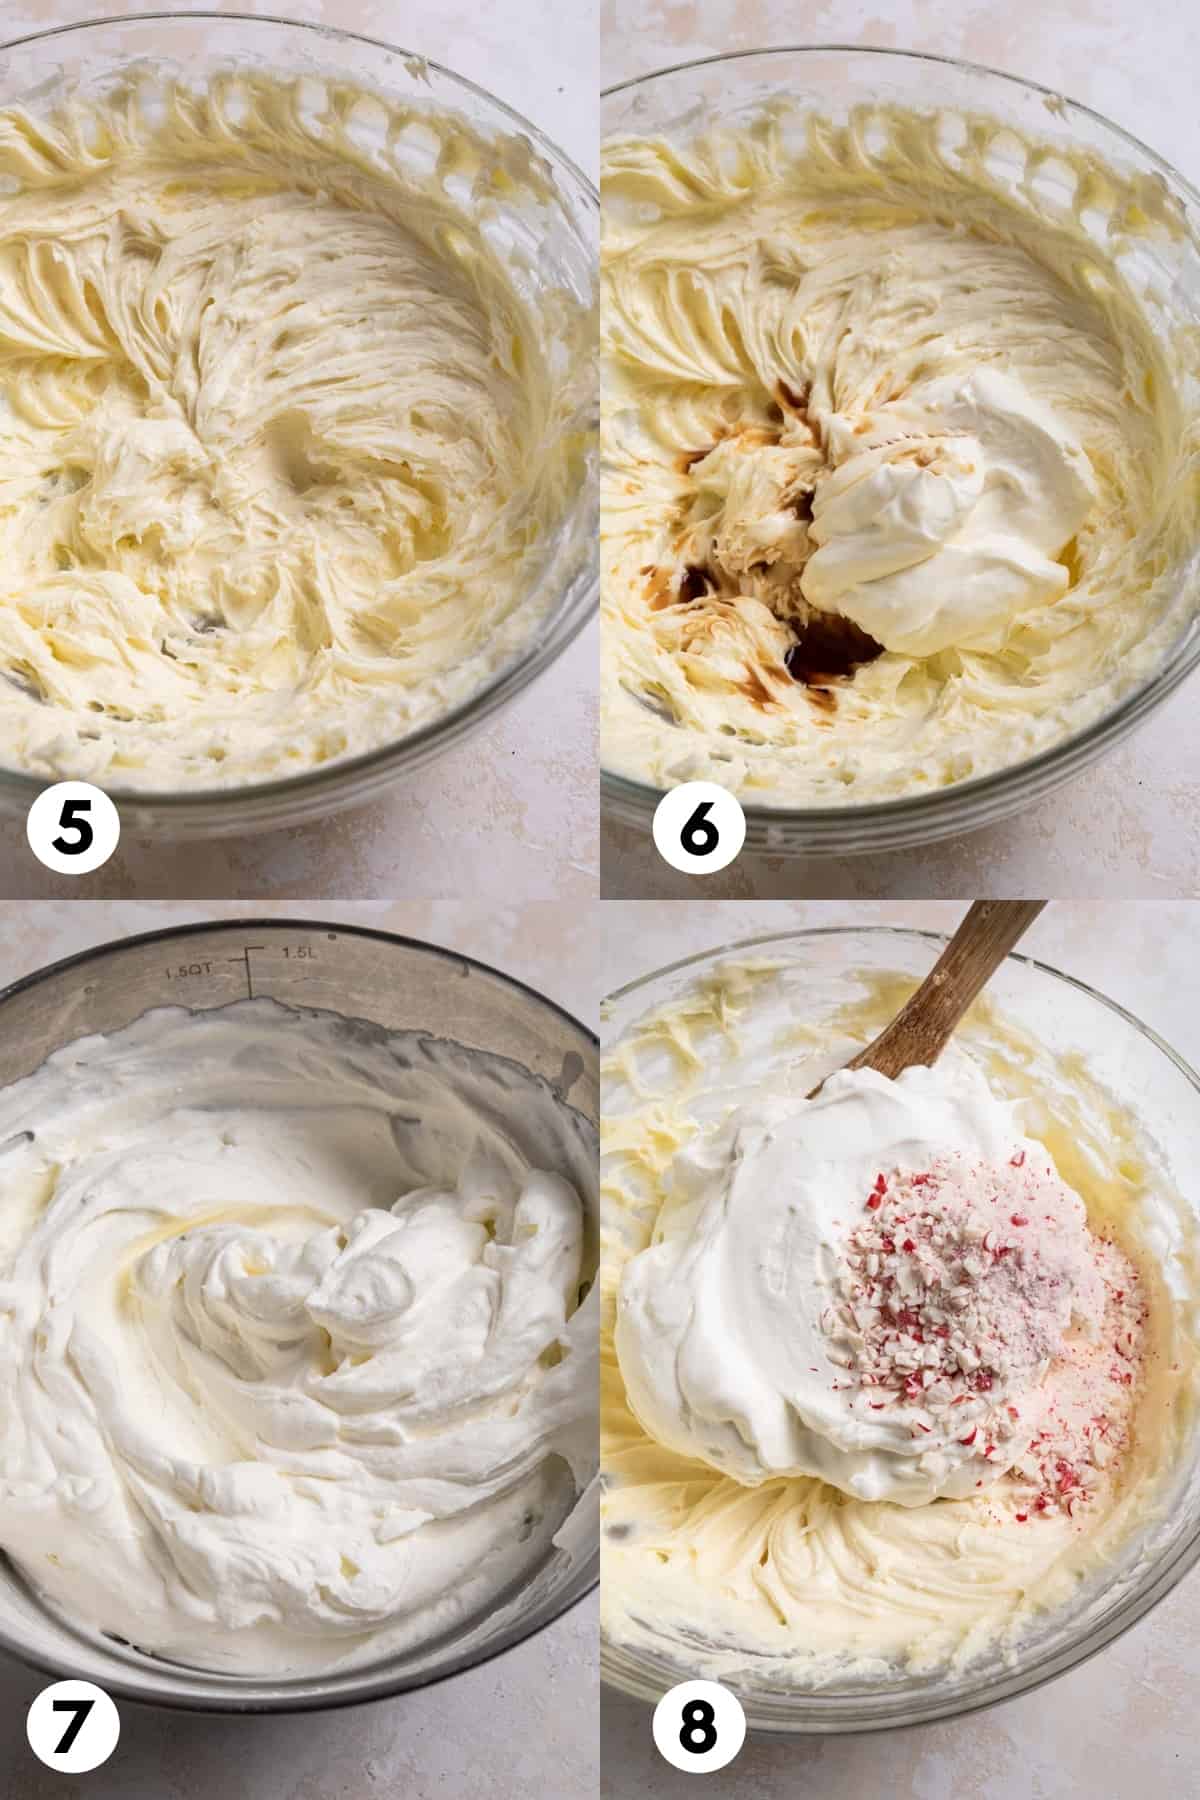 Cream cheese whipped and then other ingredients added in step by step photos to make peppermint cheesecake.